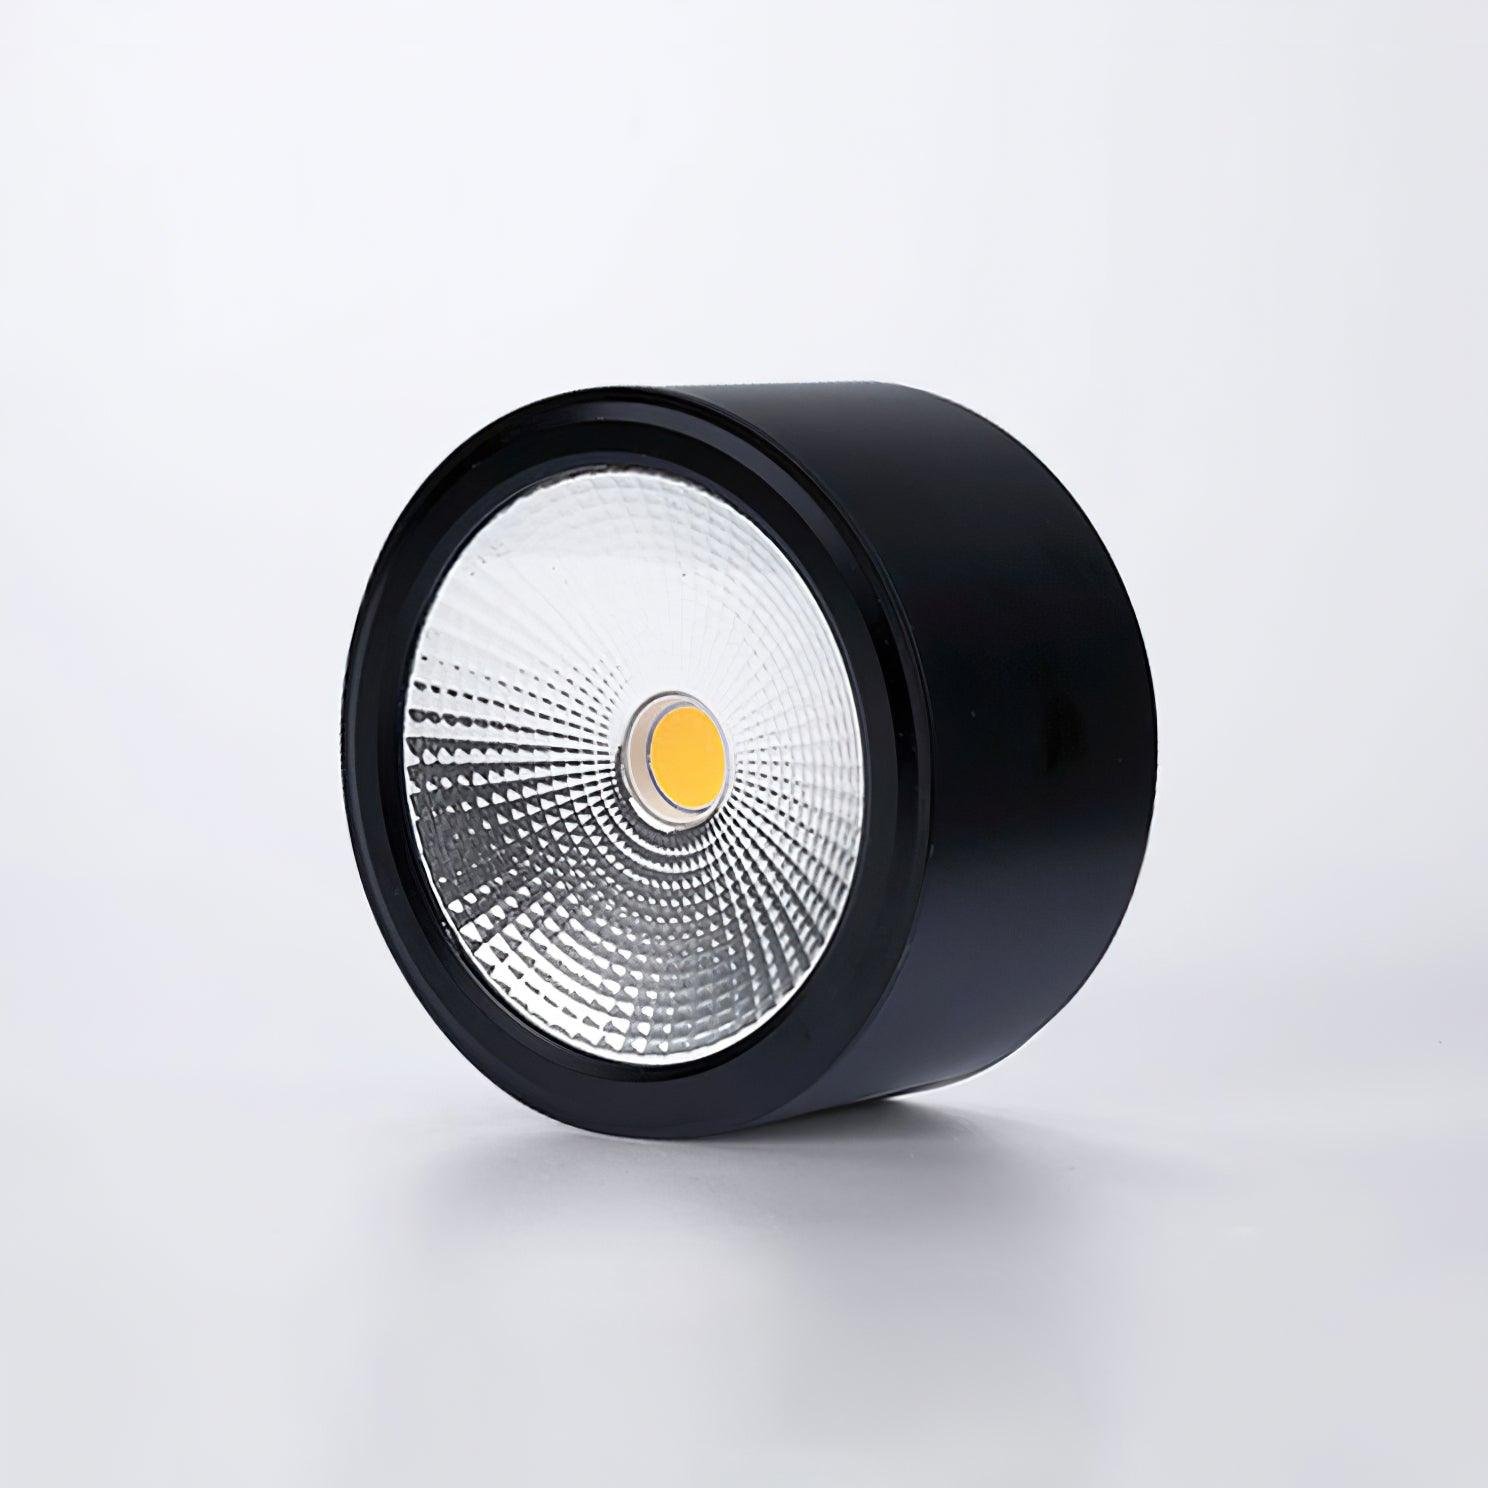 10 Anzio Spotlights in Black with Cool Light, Diameter 2.8 inches x Height 1.6 inches